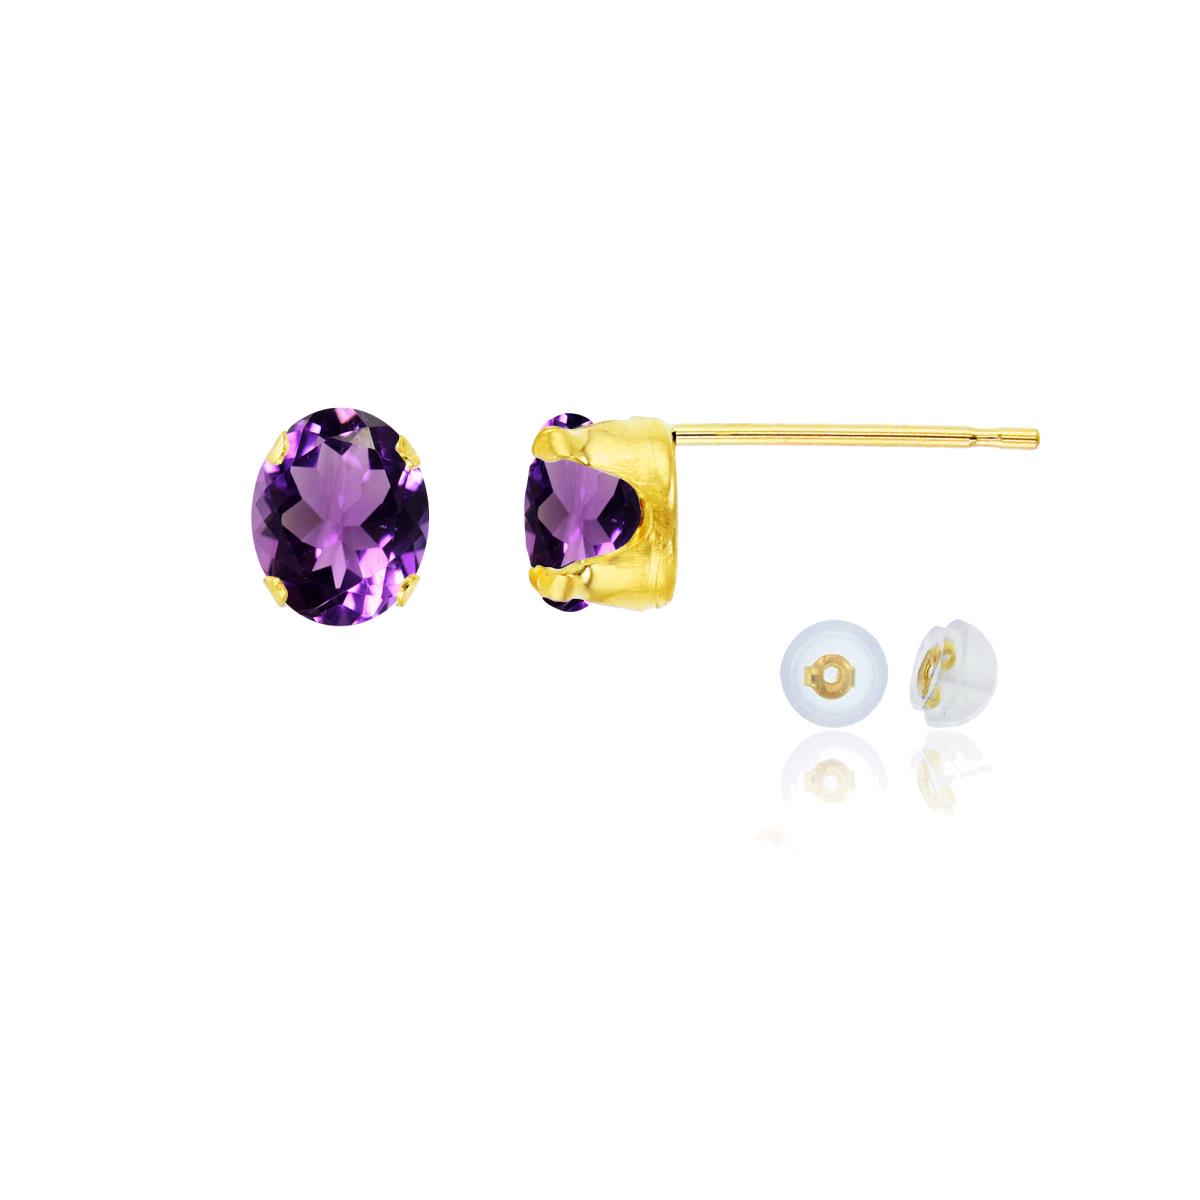 14K Yellow Gold 6x4mm Oval Amethyst Stud Earring with Silicone Back